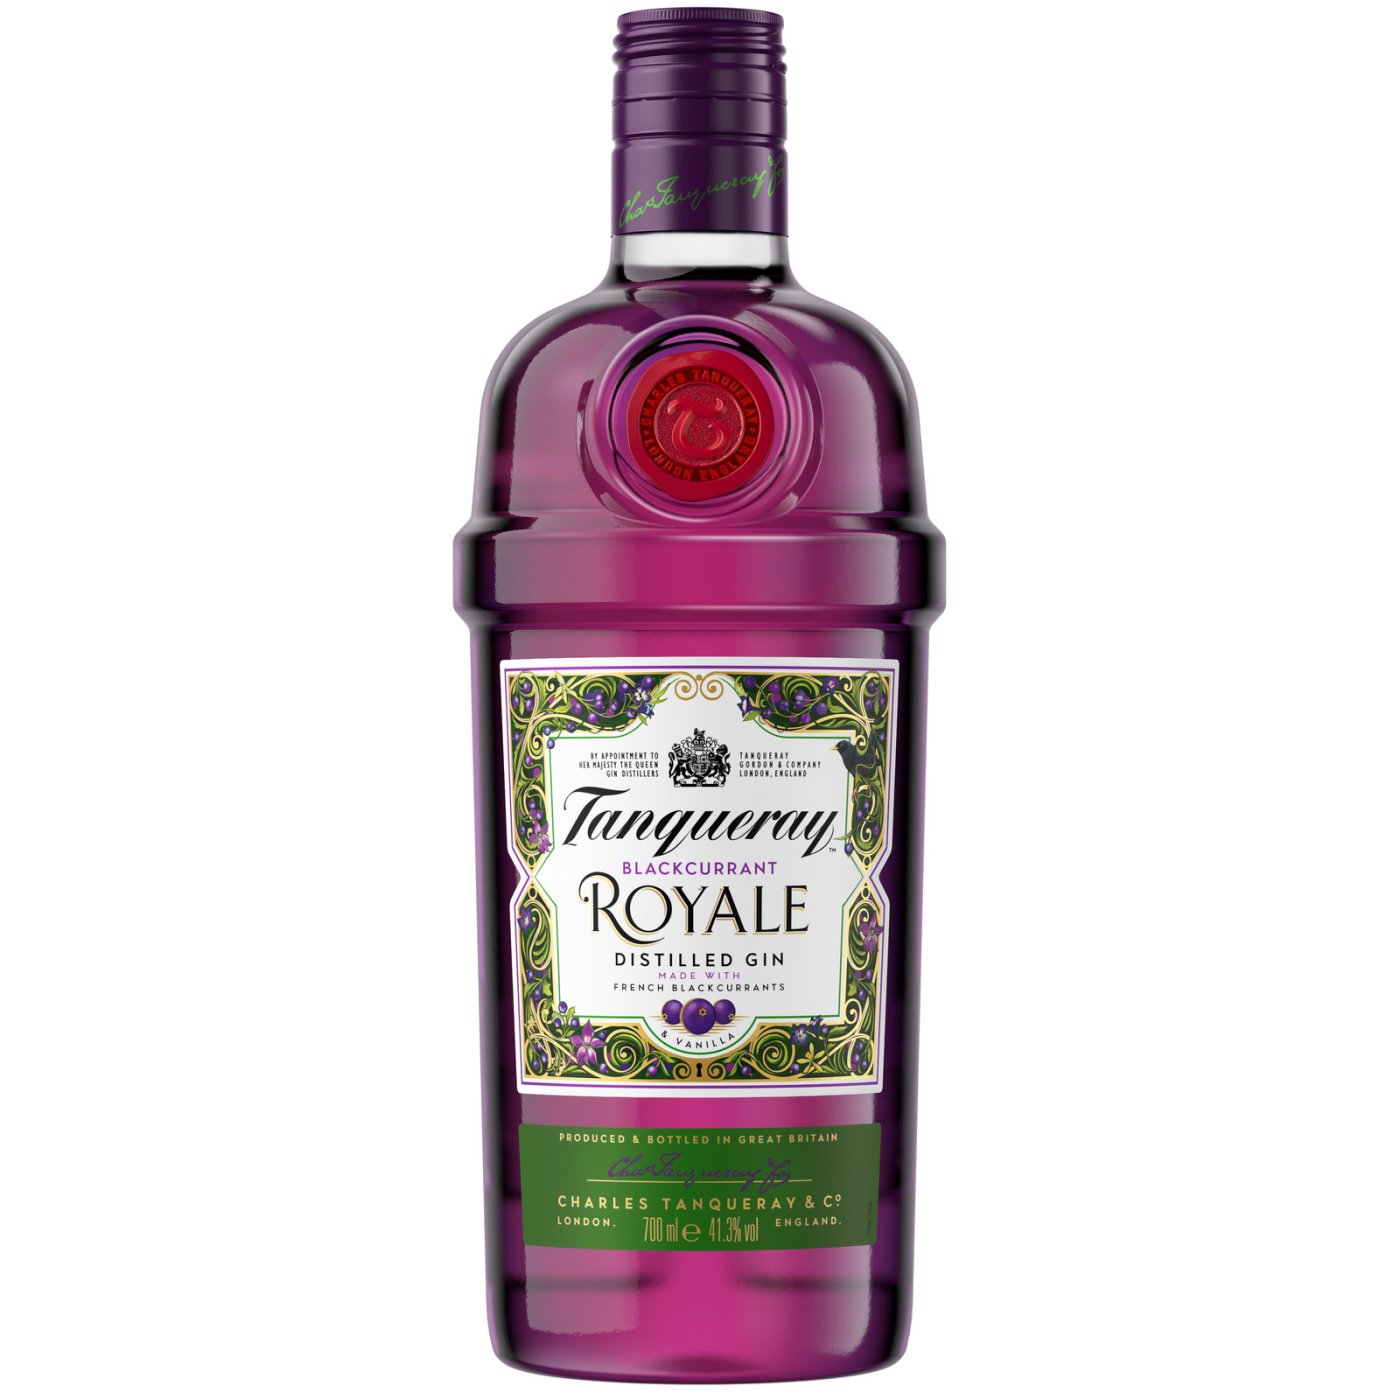 Tanqueray - Blackcurrant Royale 70cl